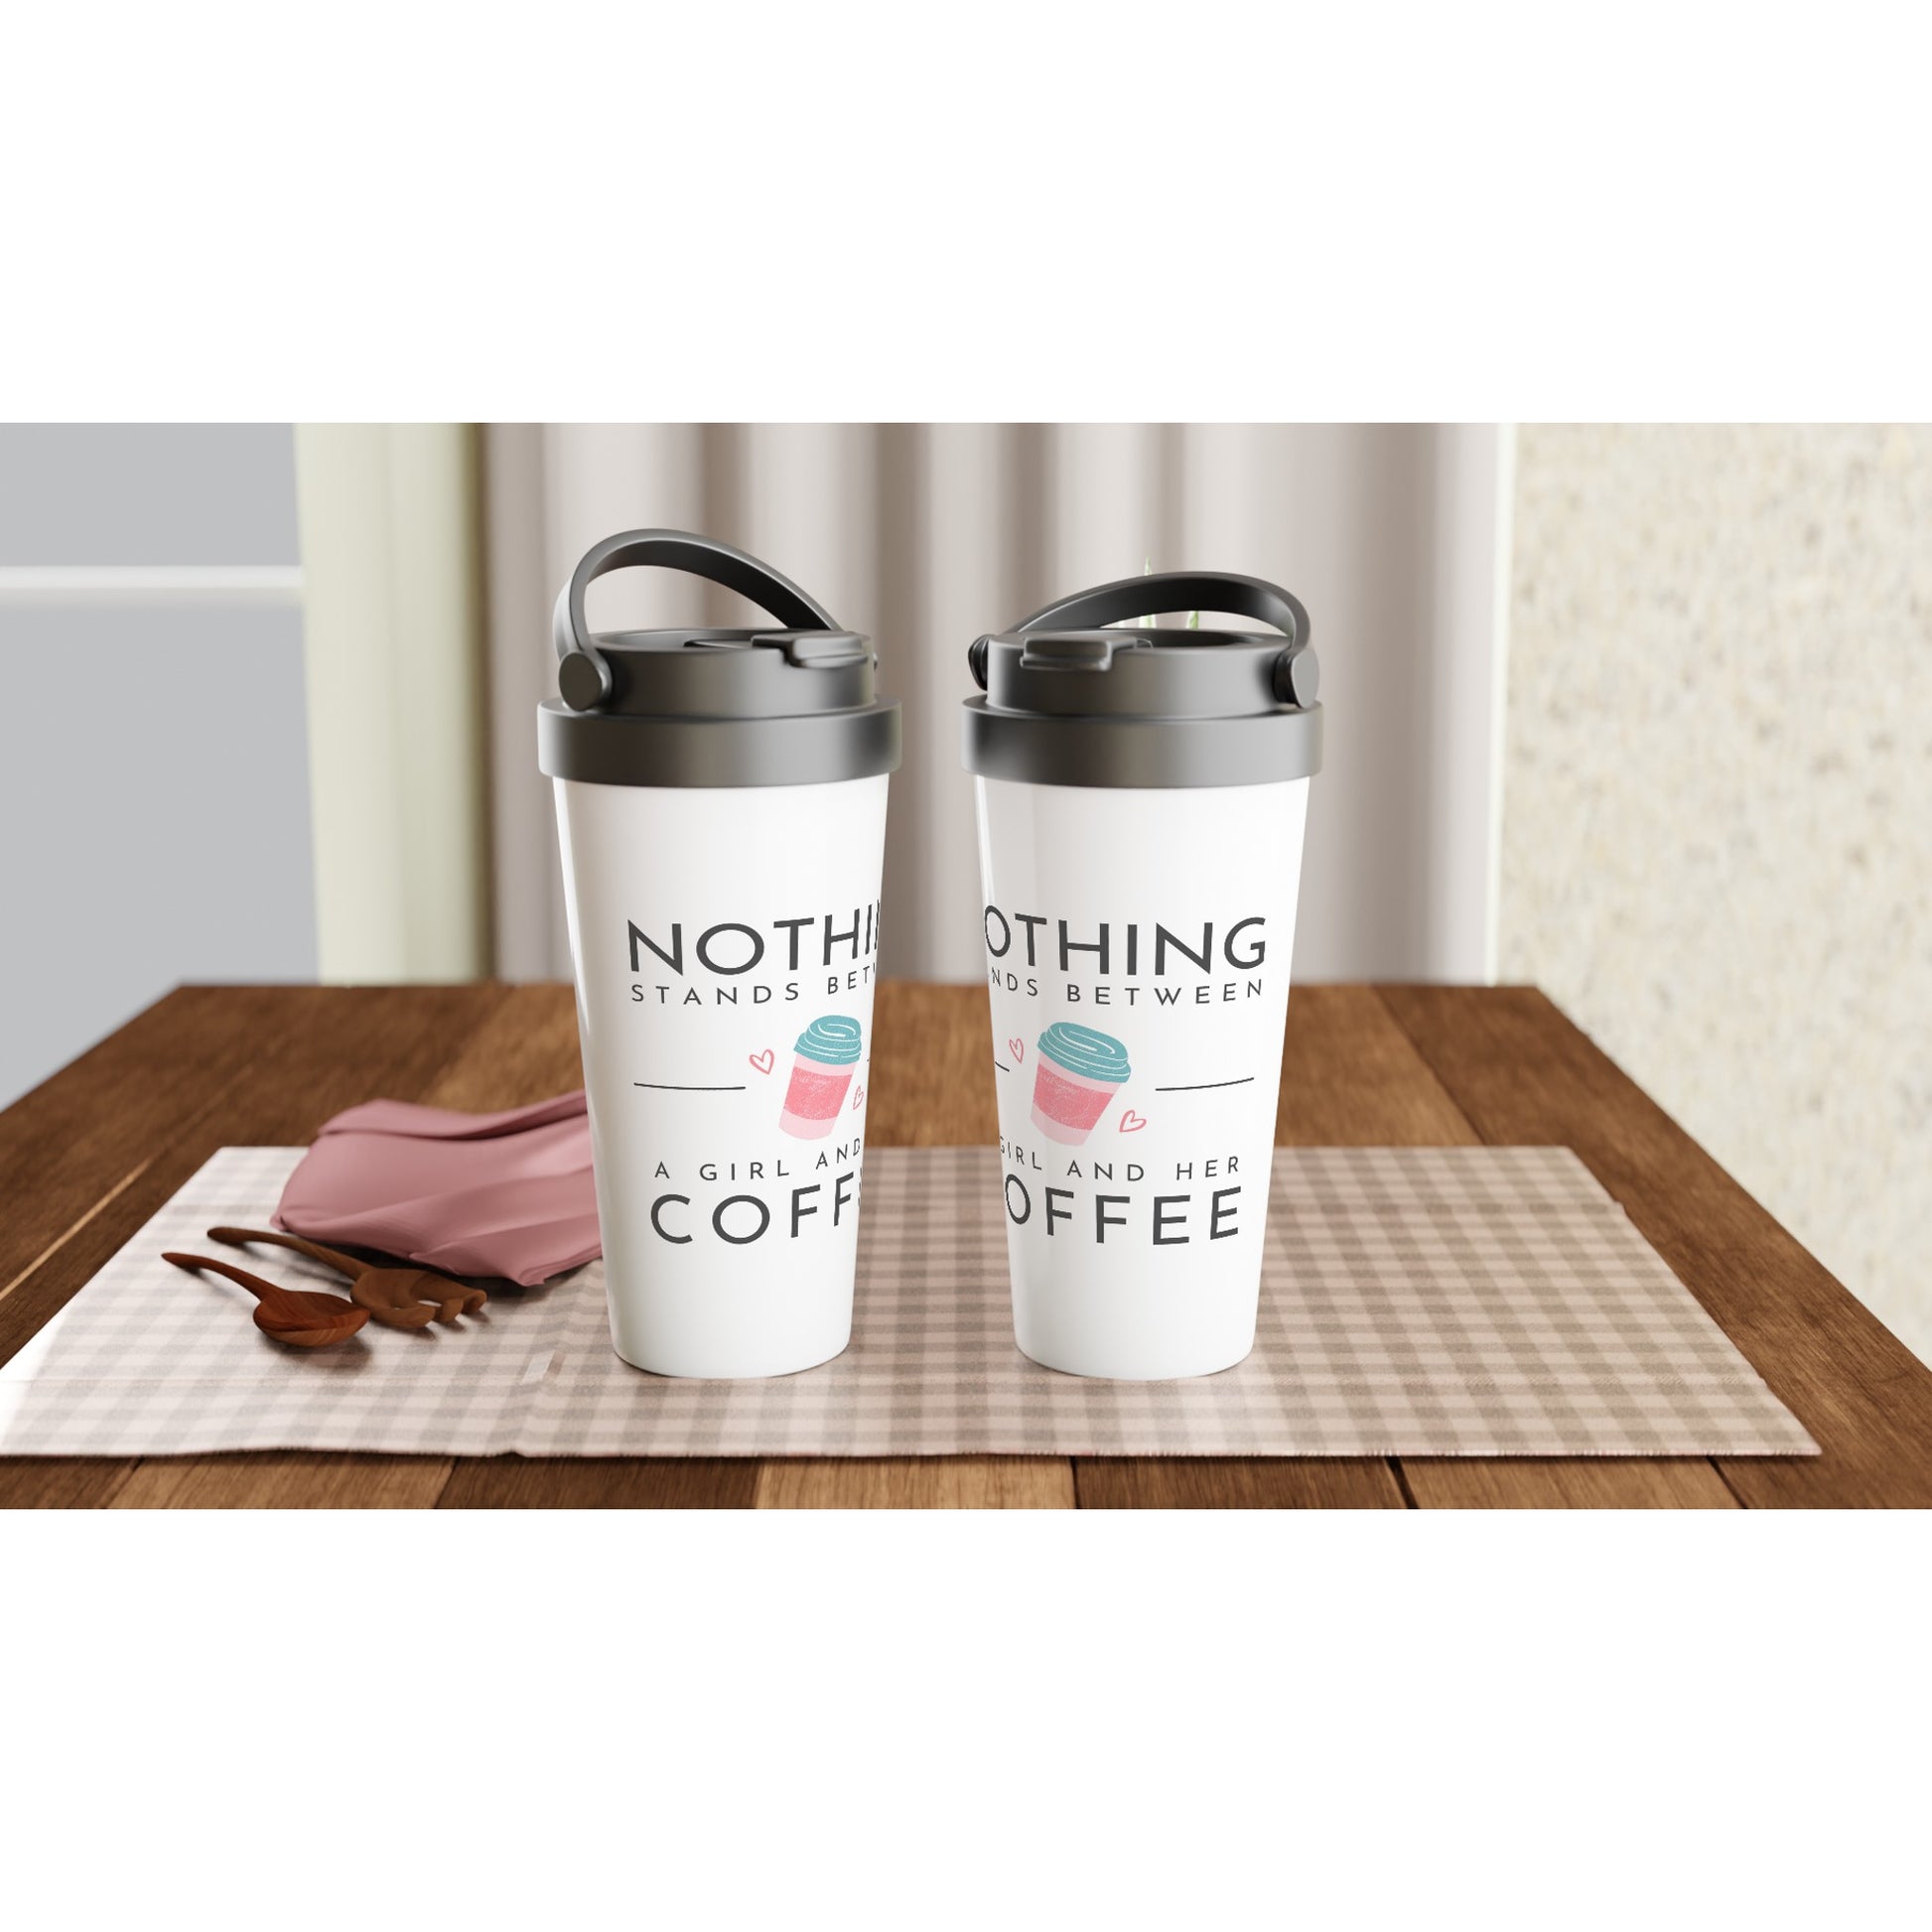 Nothing Stands Between A Girl And Her Coffee - White 15oz Stainless Steel Travel Mug Travel Mug Coffee